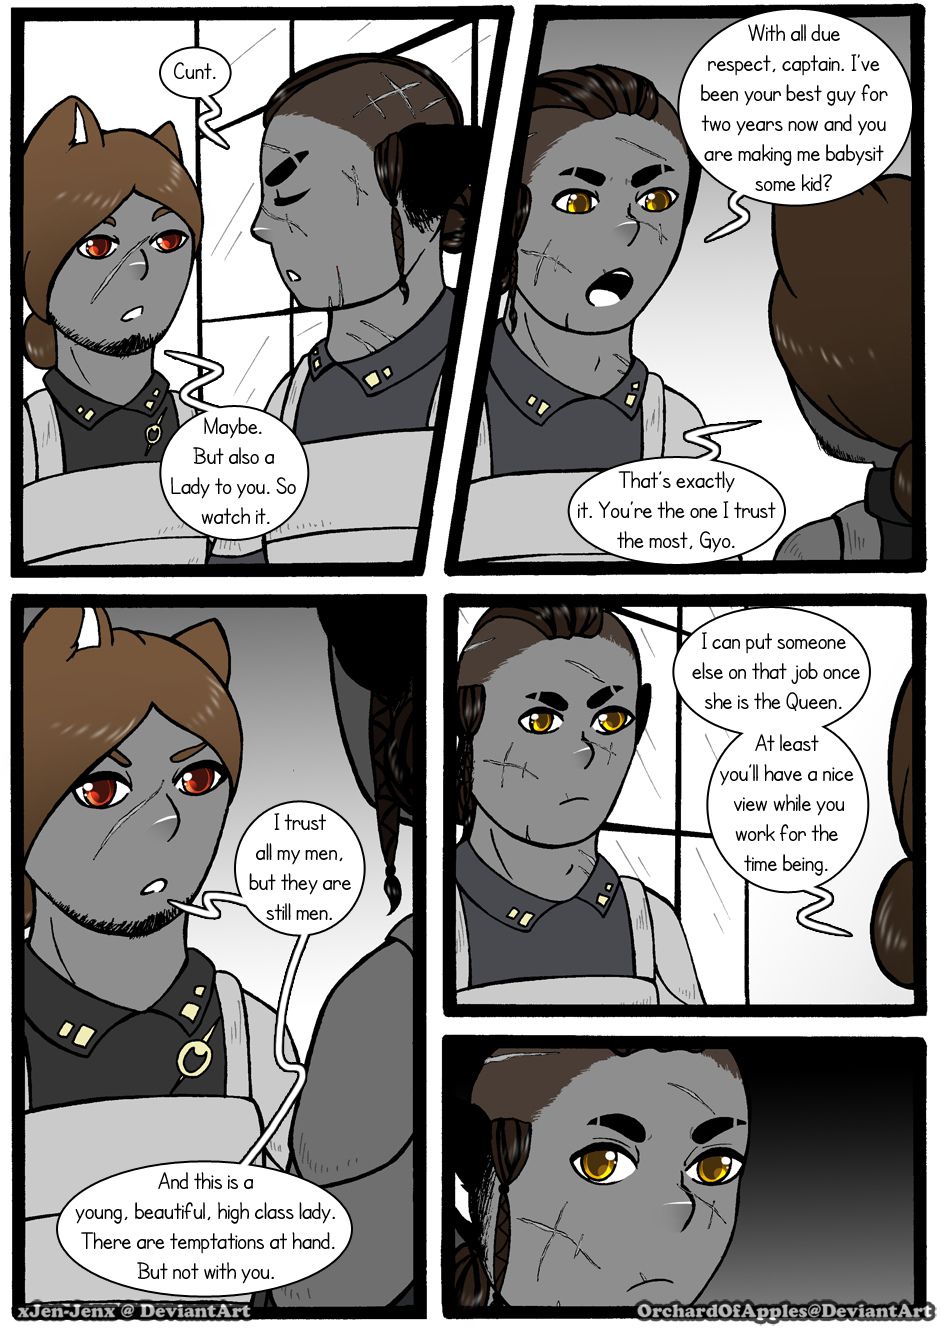 [Jeny-jen94] Between Kings and Queens [Ongoing] 328